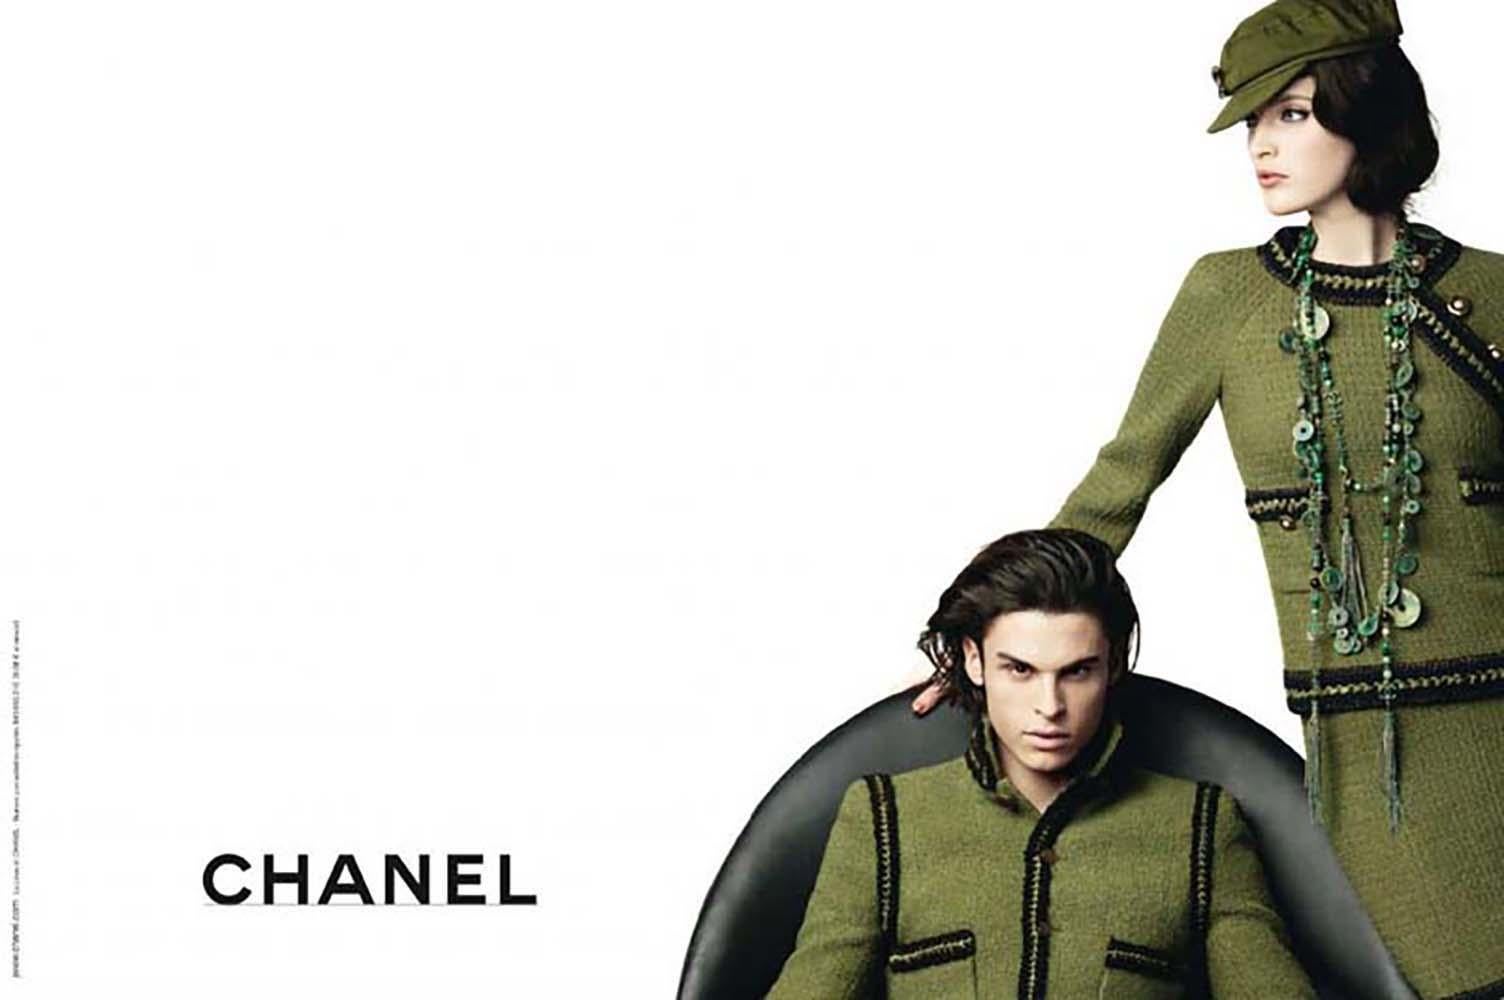 One of the most iconic Chanel jacket in the history -- green 4-pockets tweed jacket from Ad Campaign of Paris / SHANGHAI Collection, metiers d'Art
- CC logo antique 'coin' buttons
- signature metallic braided trim
- recognisable 4-pockets